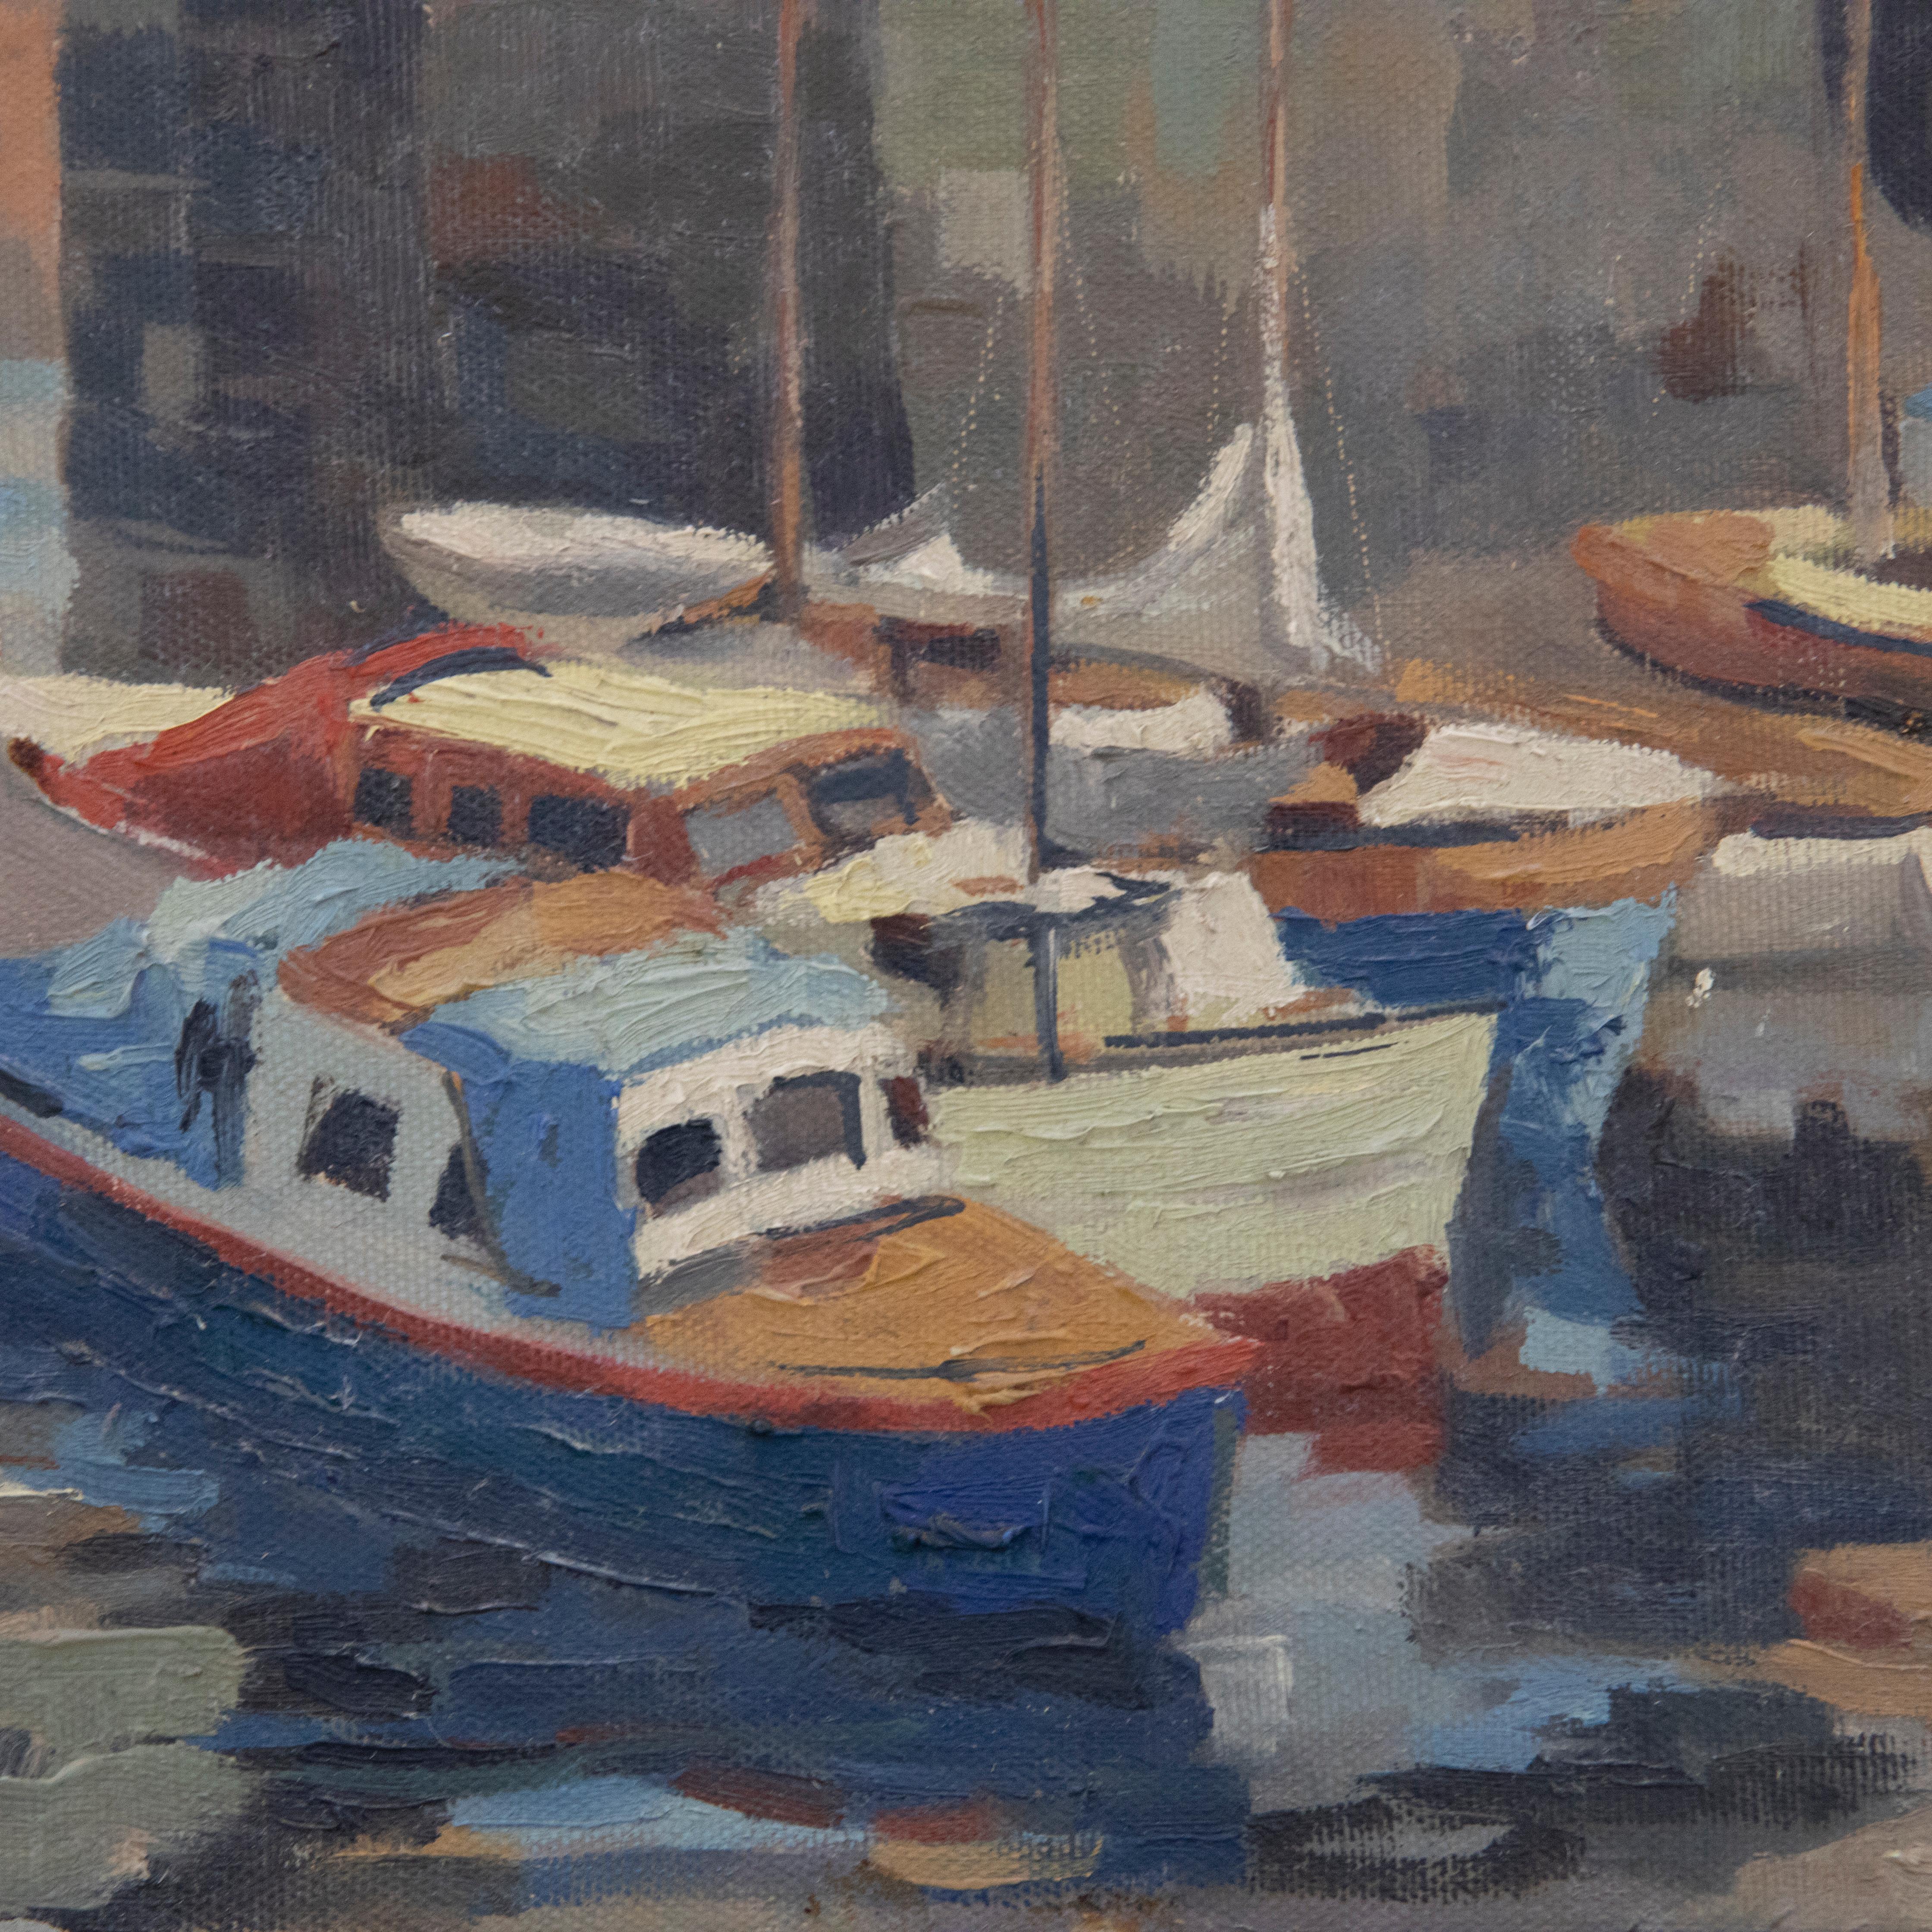 A wonderful mid-century study of boats moored in a harbour. The low tide has revealed much of the old stone walls of the harbour. Wonderfully painted with areas of impasto and thick, expressive brushwork. Presented in a simple painted wood frame.